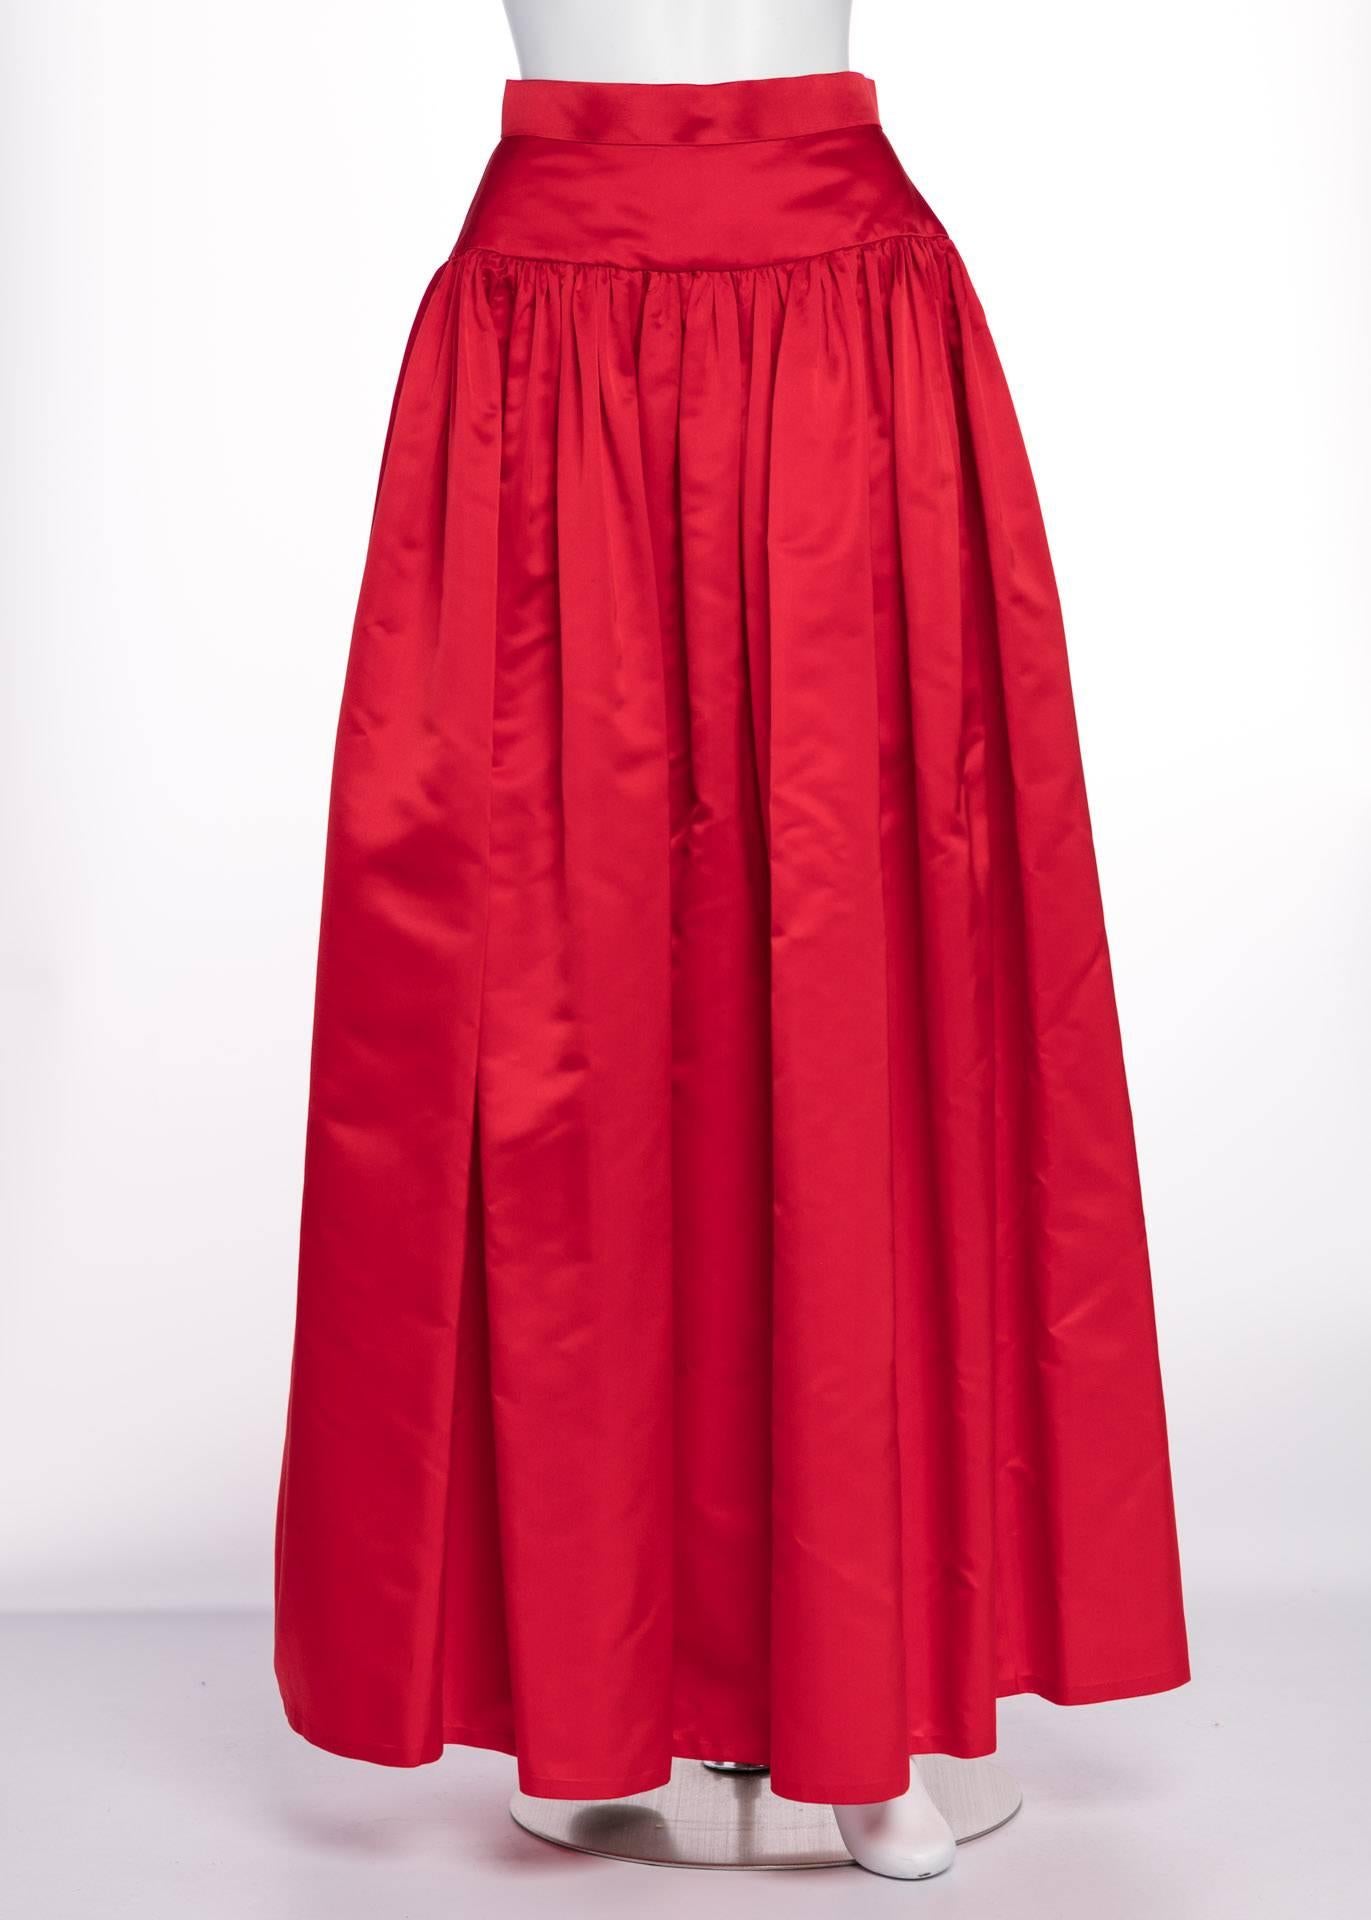 Bill Blass reveled in 1980s fashion, designing garments with big gestures and bold colors. The crimson red of this skirt spills smoothly over the hips with a beautifully lined yoke. Gathers of red satin fall to full length with the crisp satin